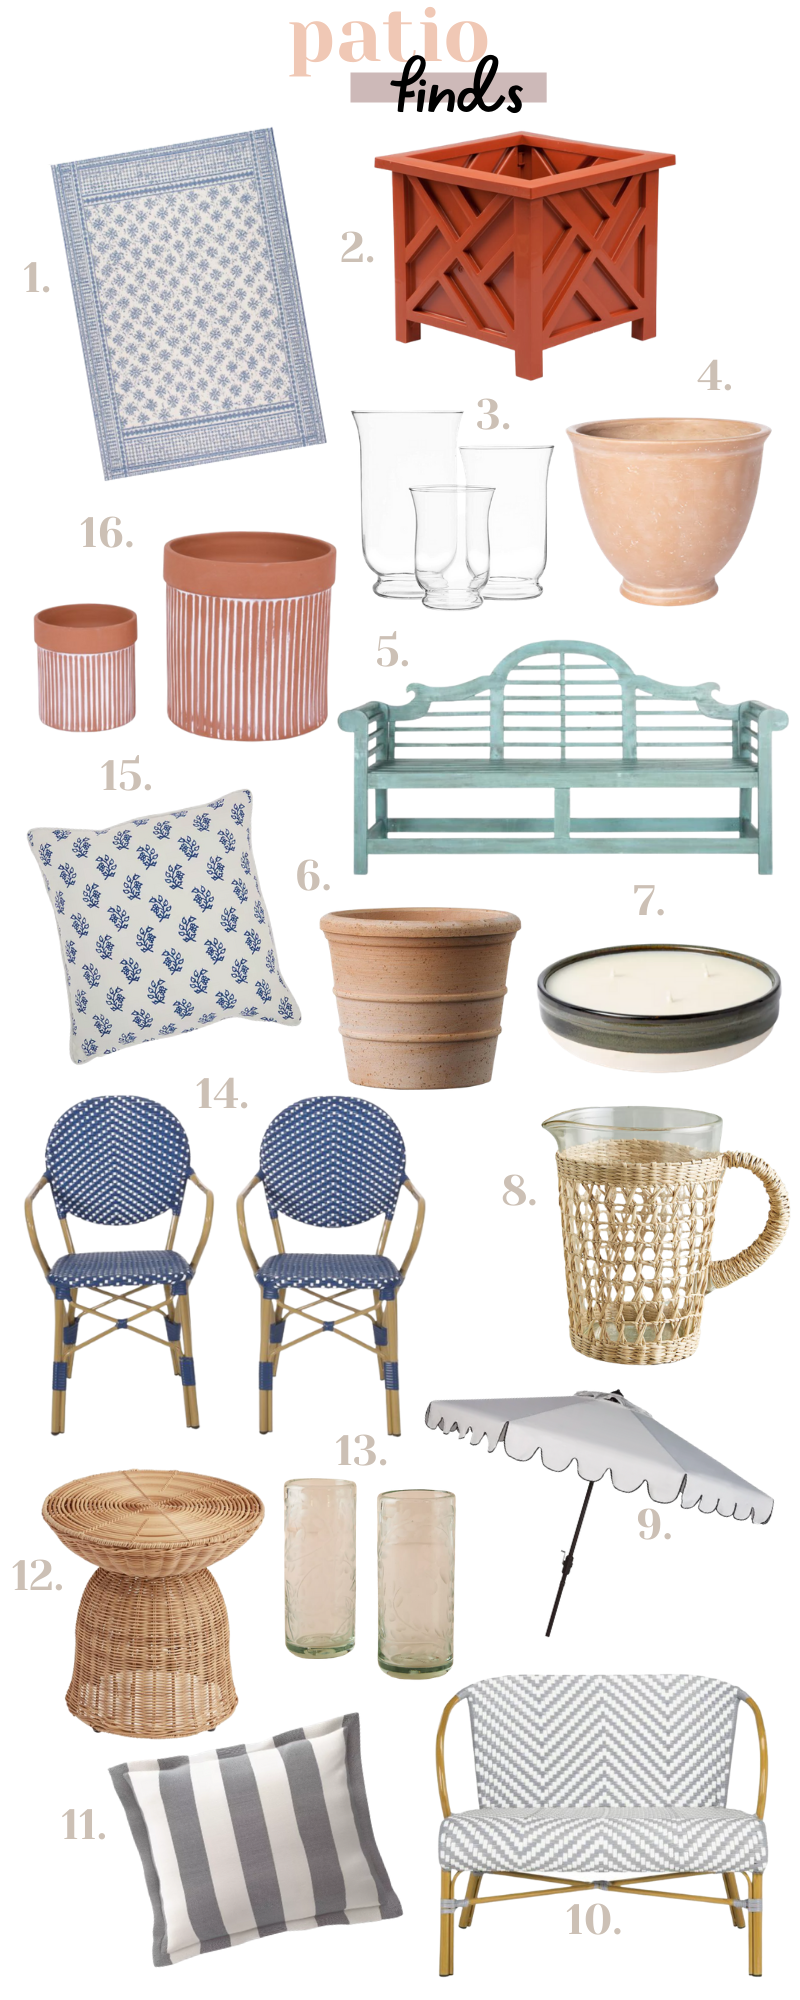 Backyard Patio Finds - The Mama Notes